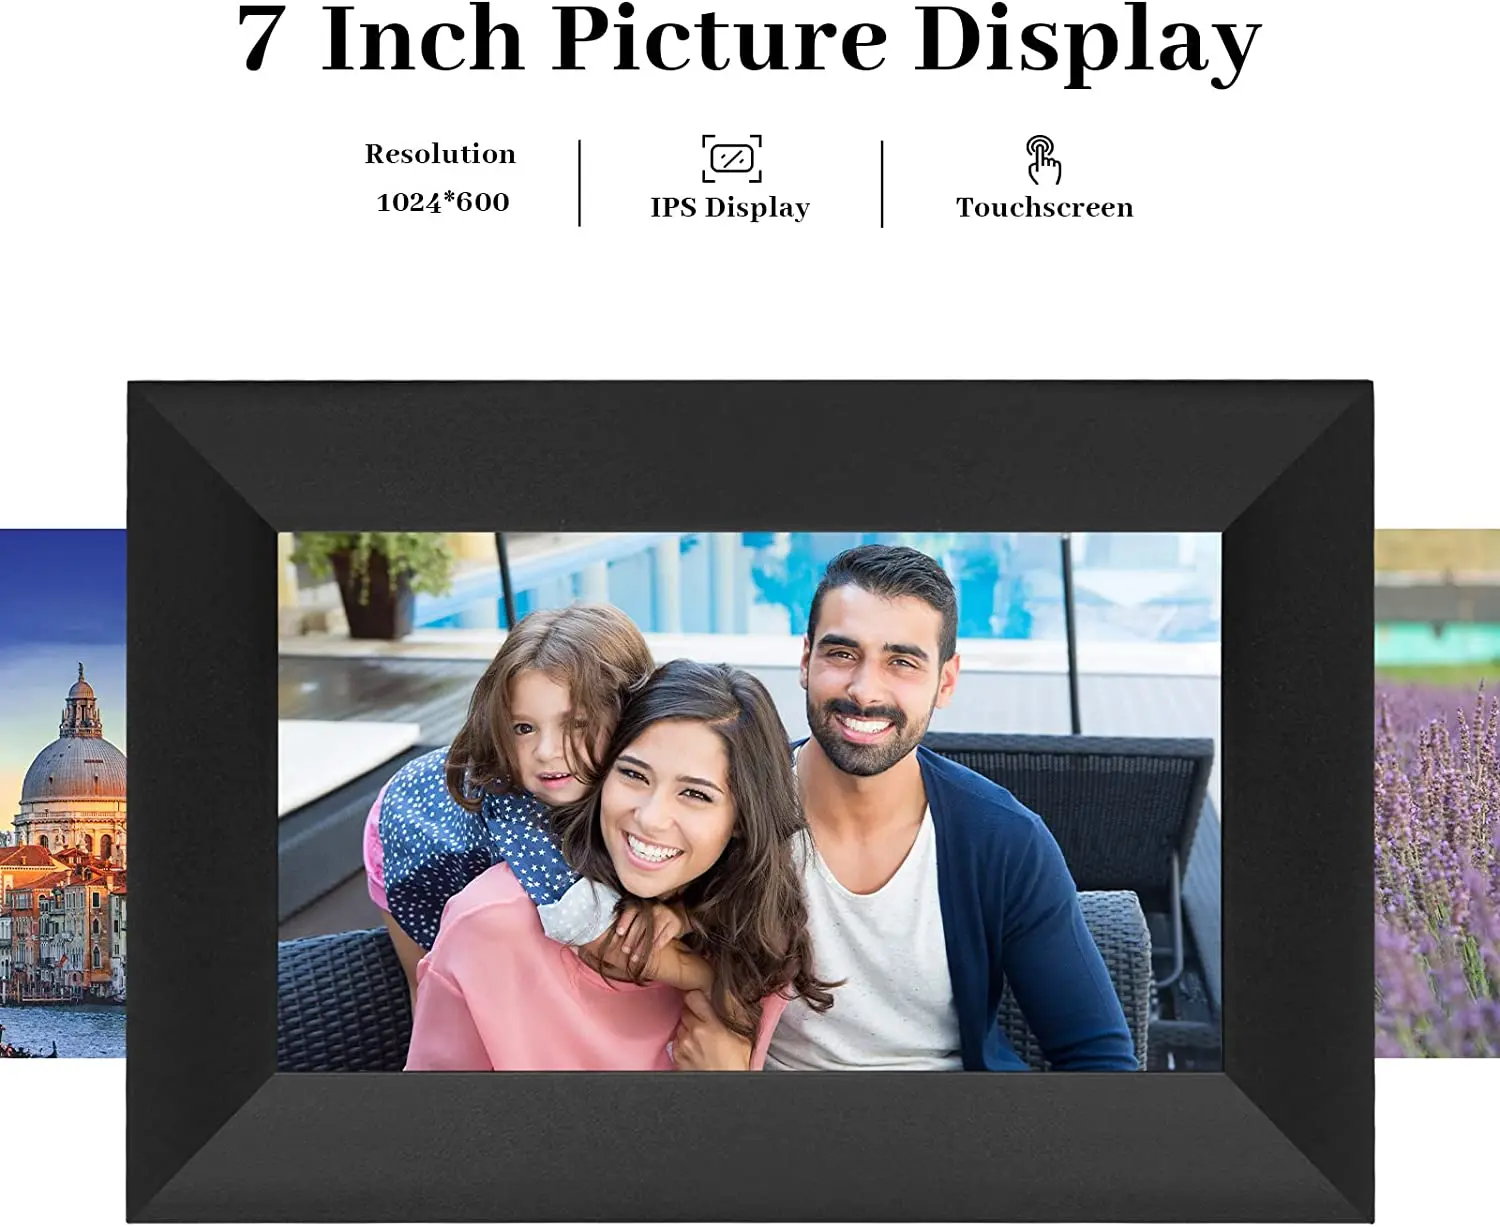 Hot Sale Digital Picture Frames 7 inch Touch Screen Digital Photo Frame Share Photos and Videos